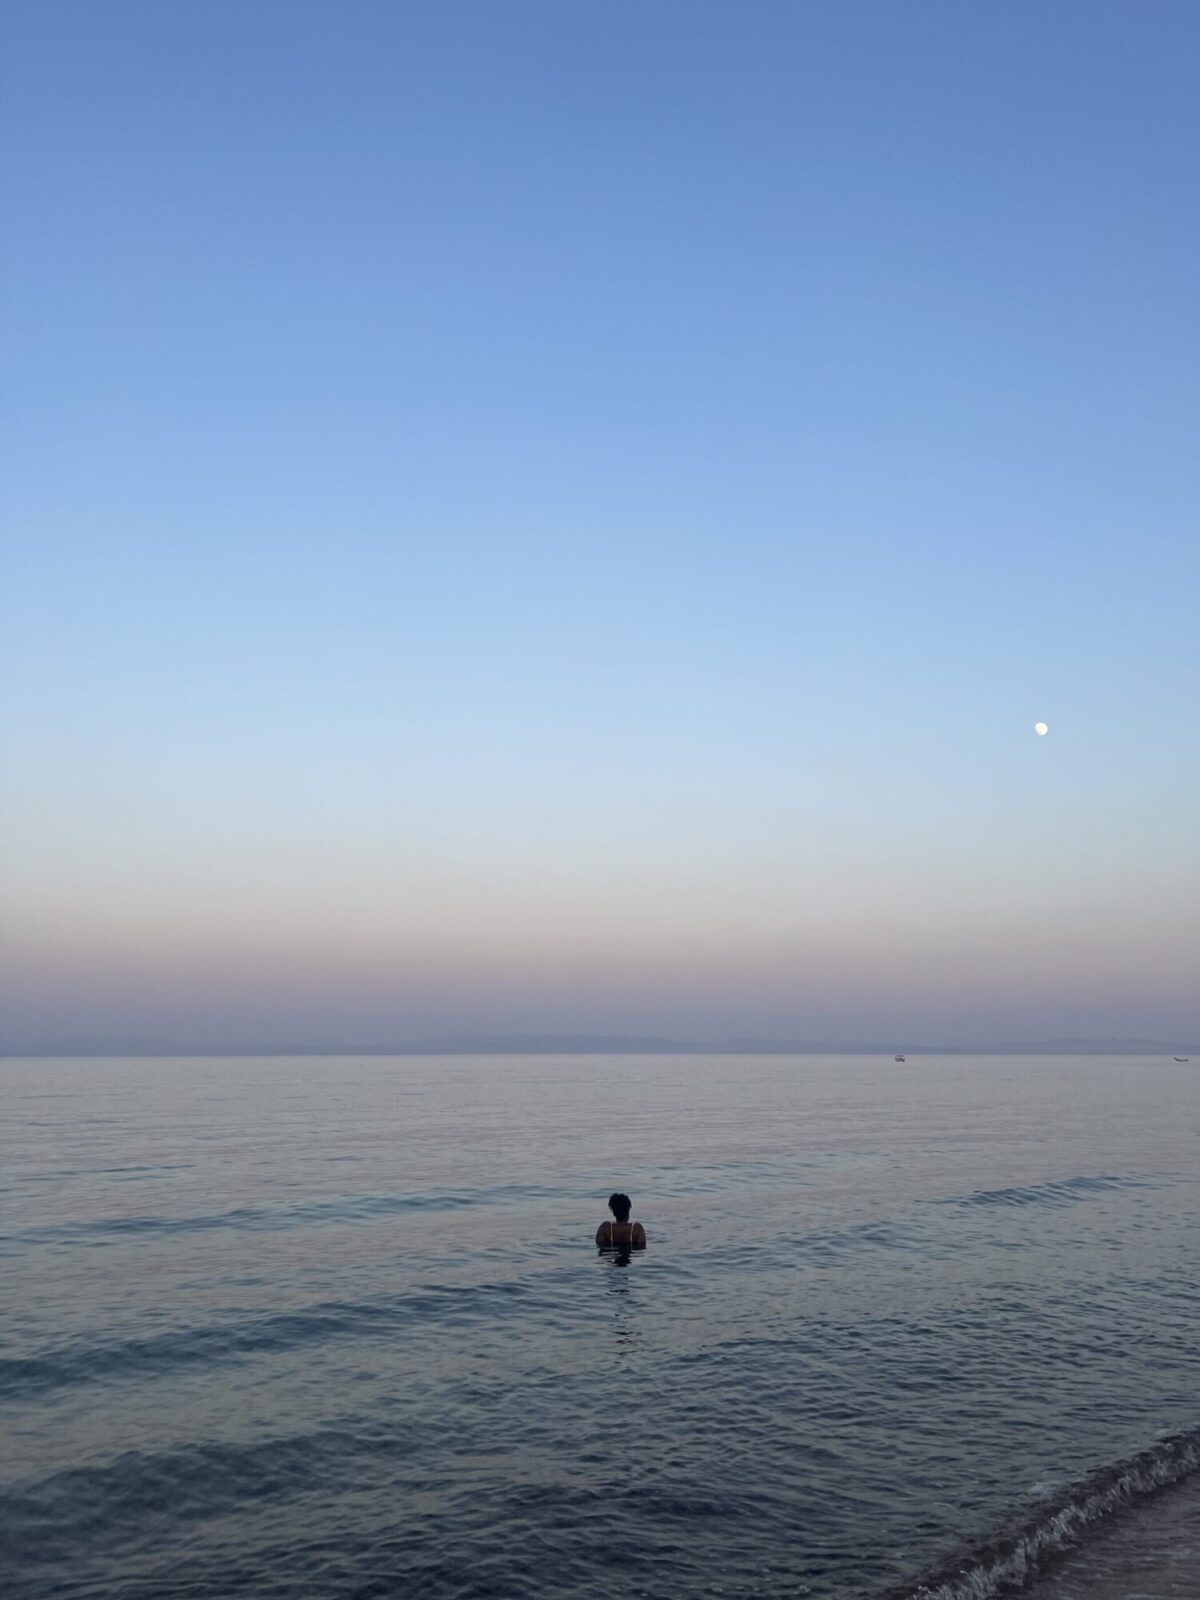 Dahab: A Guide to Egypt’s Red Sea Beach Town